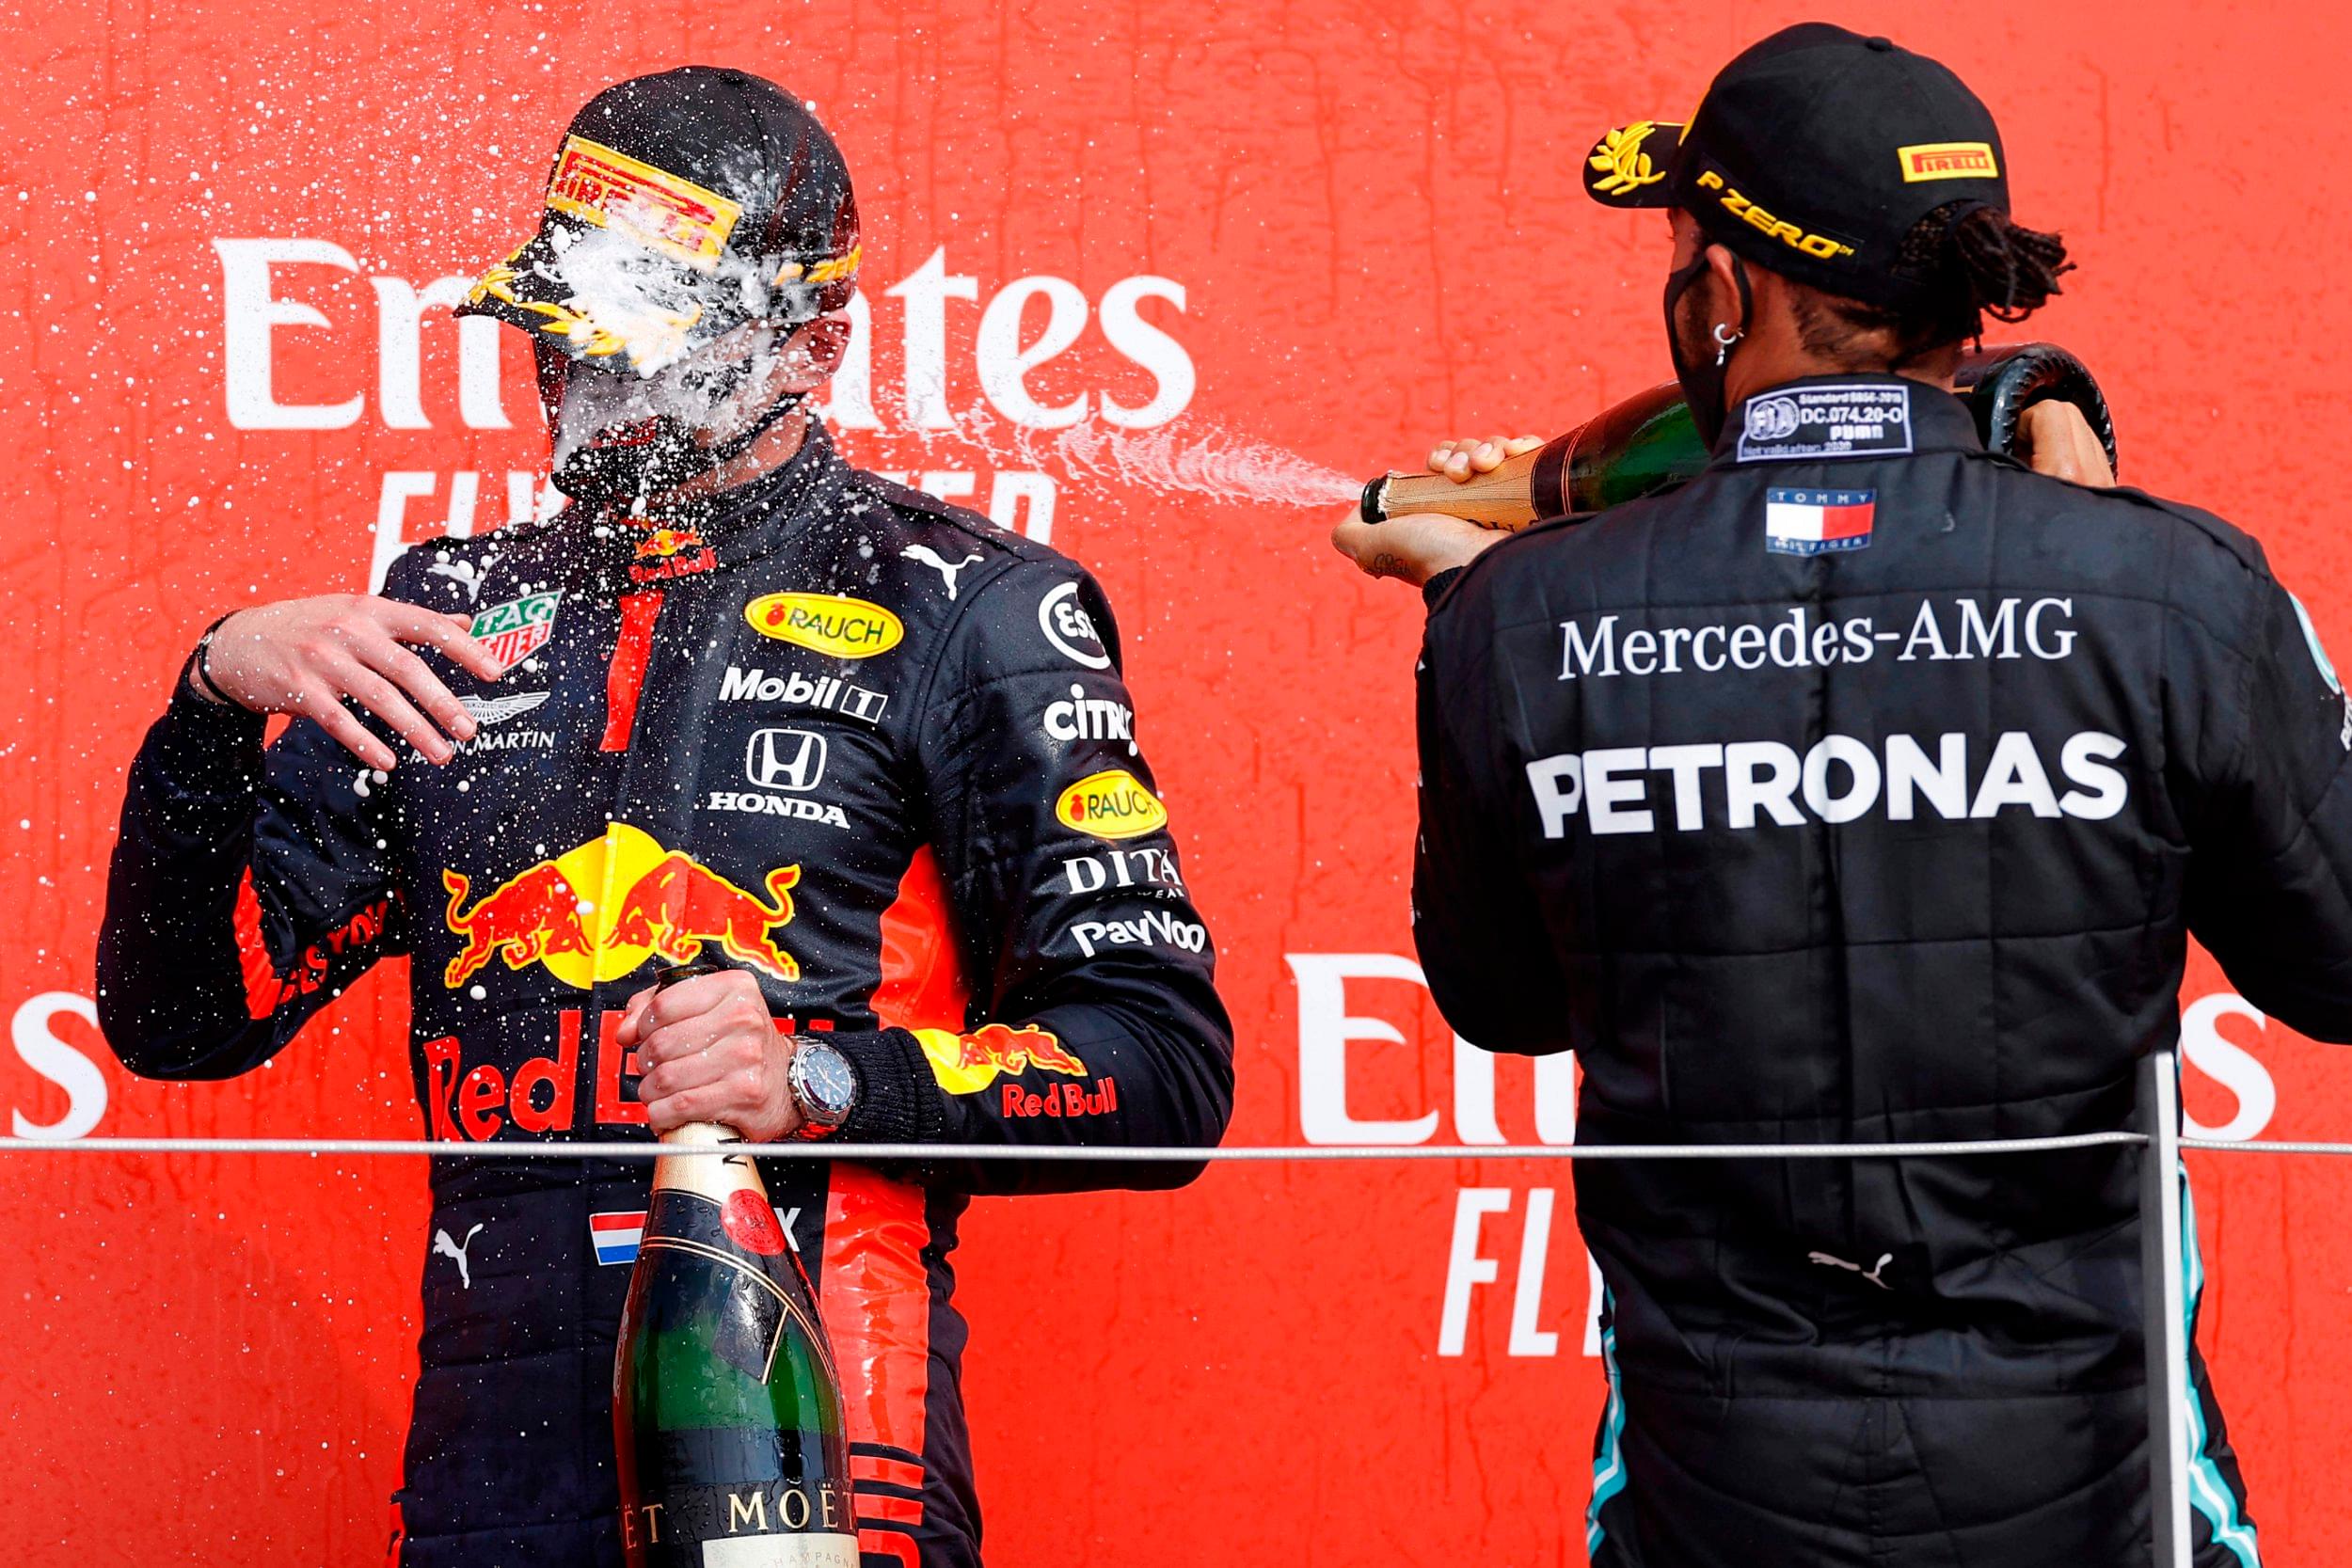 Max Verstappen to Mercedes: Speculation heats up as Red Bull driver quips he doesn't "know what Lewis is going to do"